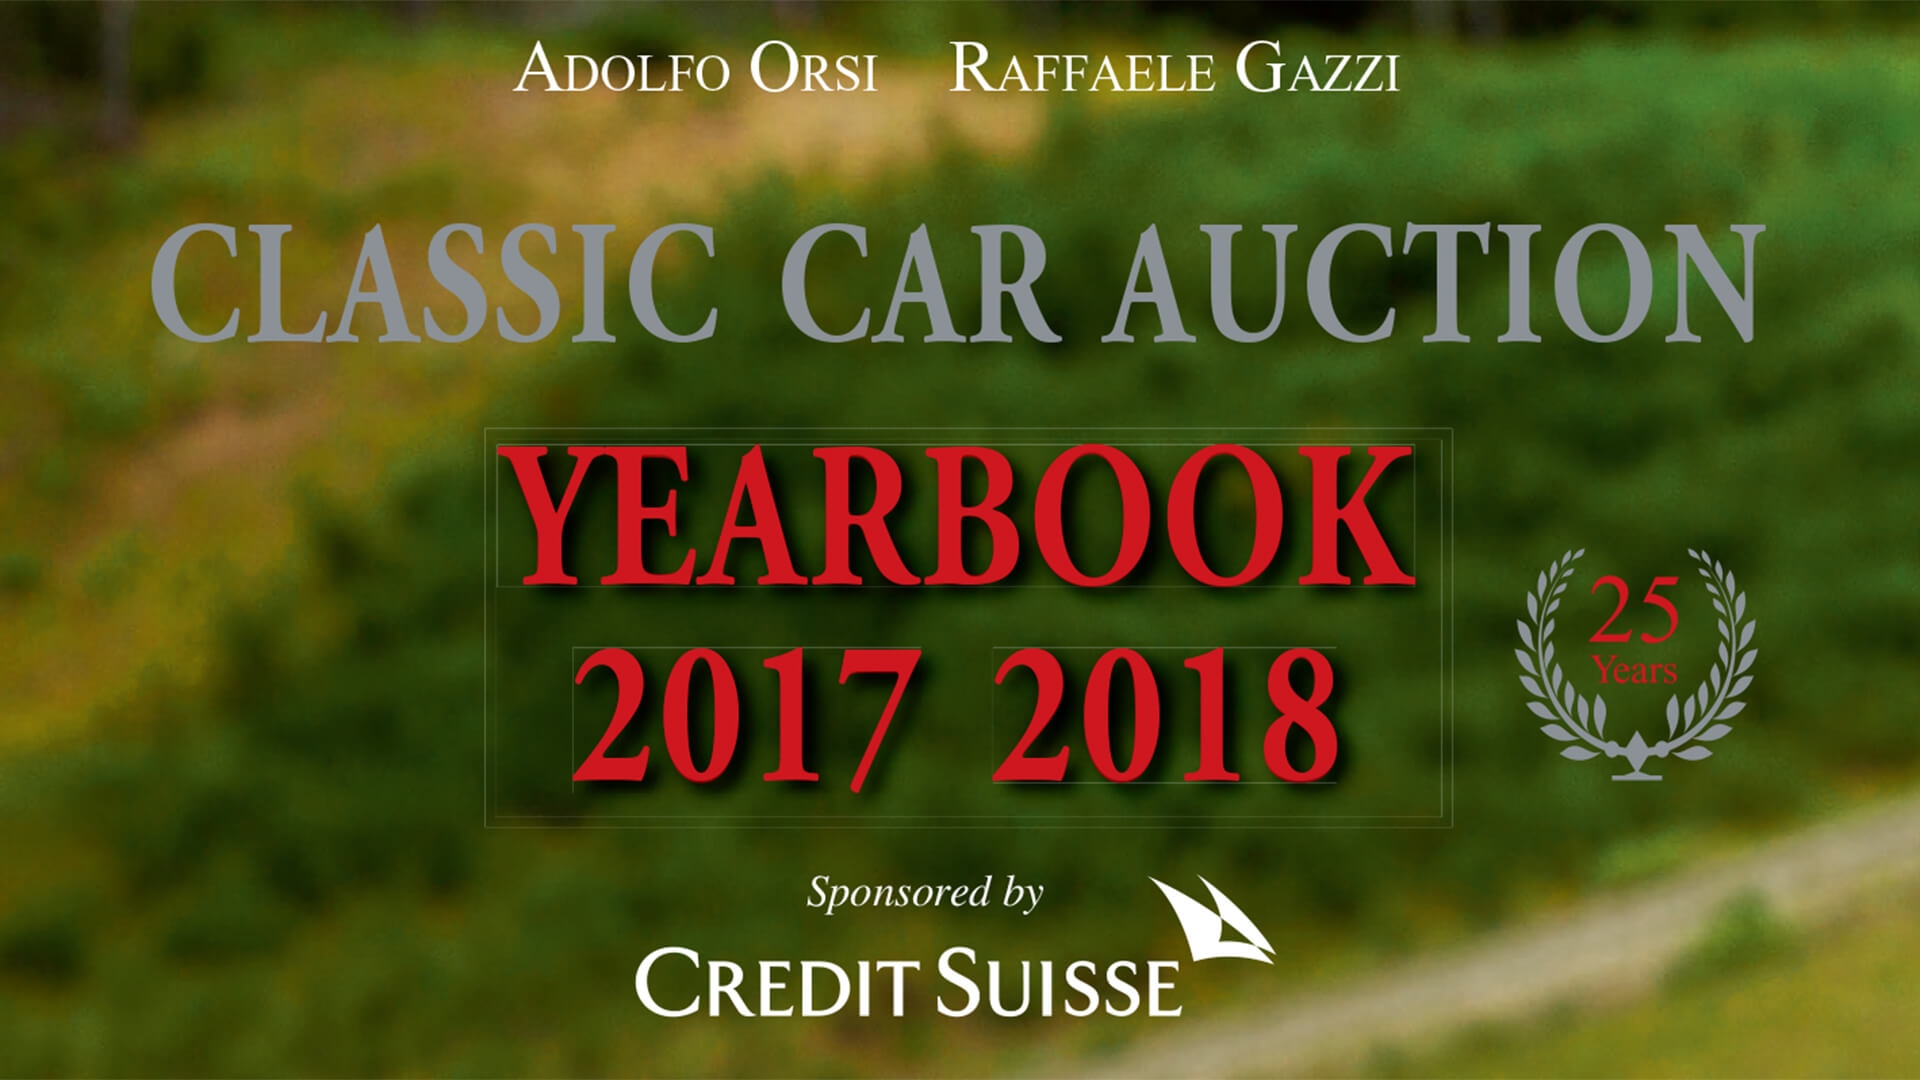 A year in retrospect: Classic Car Auction Yearbook 2017-2018